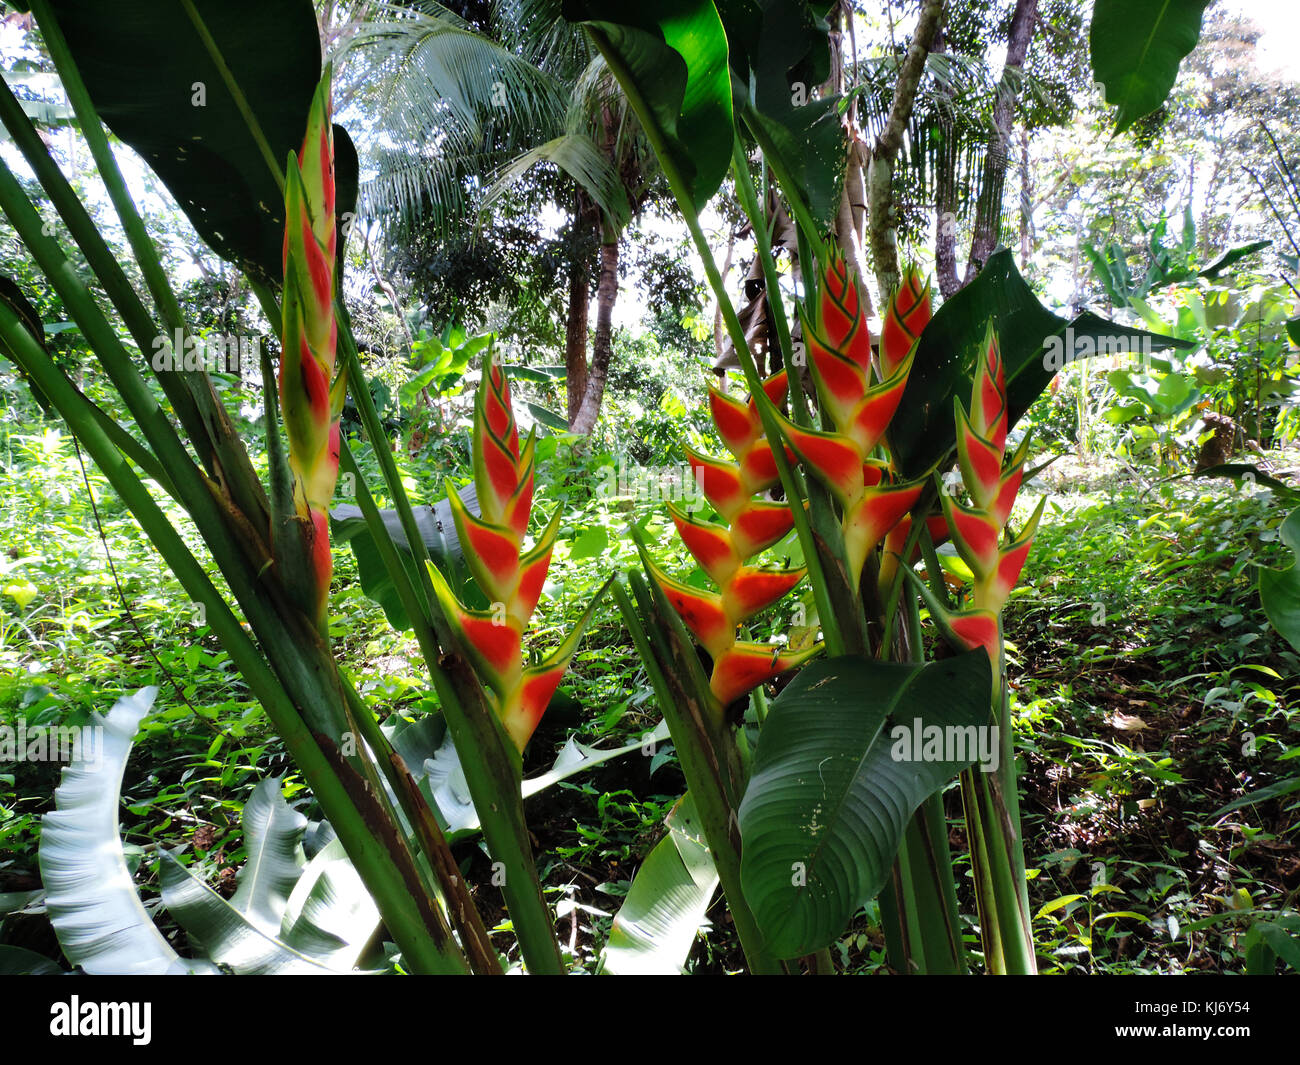 LOBSTER CLAW FLOWERS (HELICONIA SP.) AKA FALSE BIRD OF PARADISE OR WILD PLANTAIN. FOUND IN TROPICAL AMERICA, GUATEMALA Stock Photo